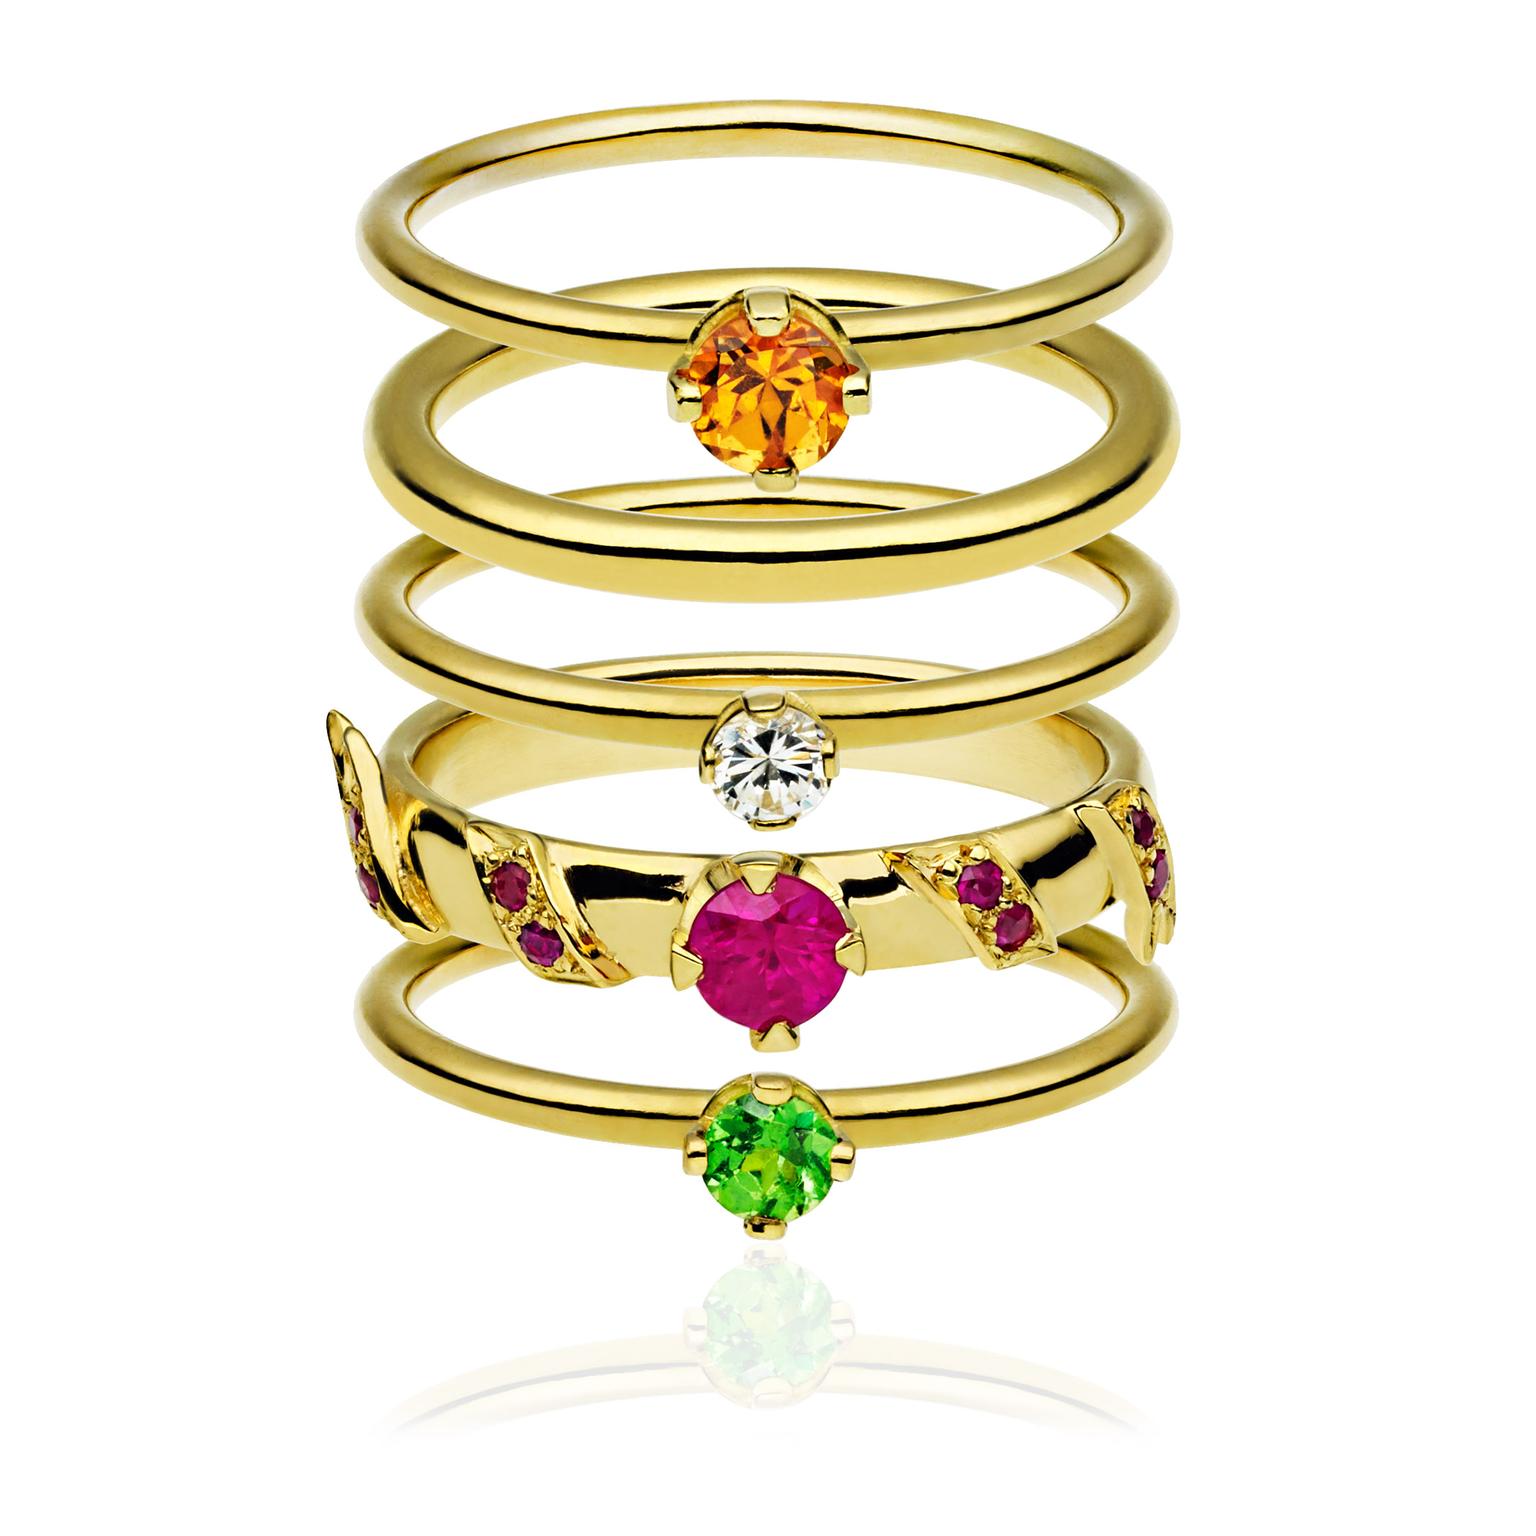 Ana-de-Costa-Stacking-Rings-Zoom